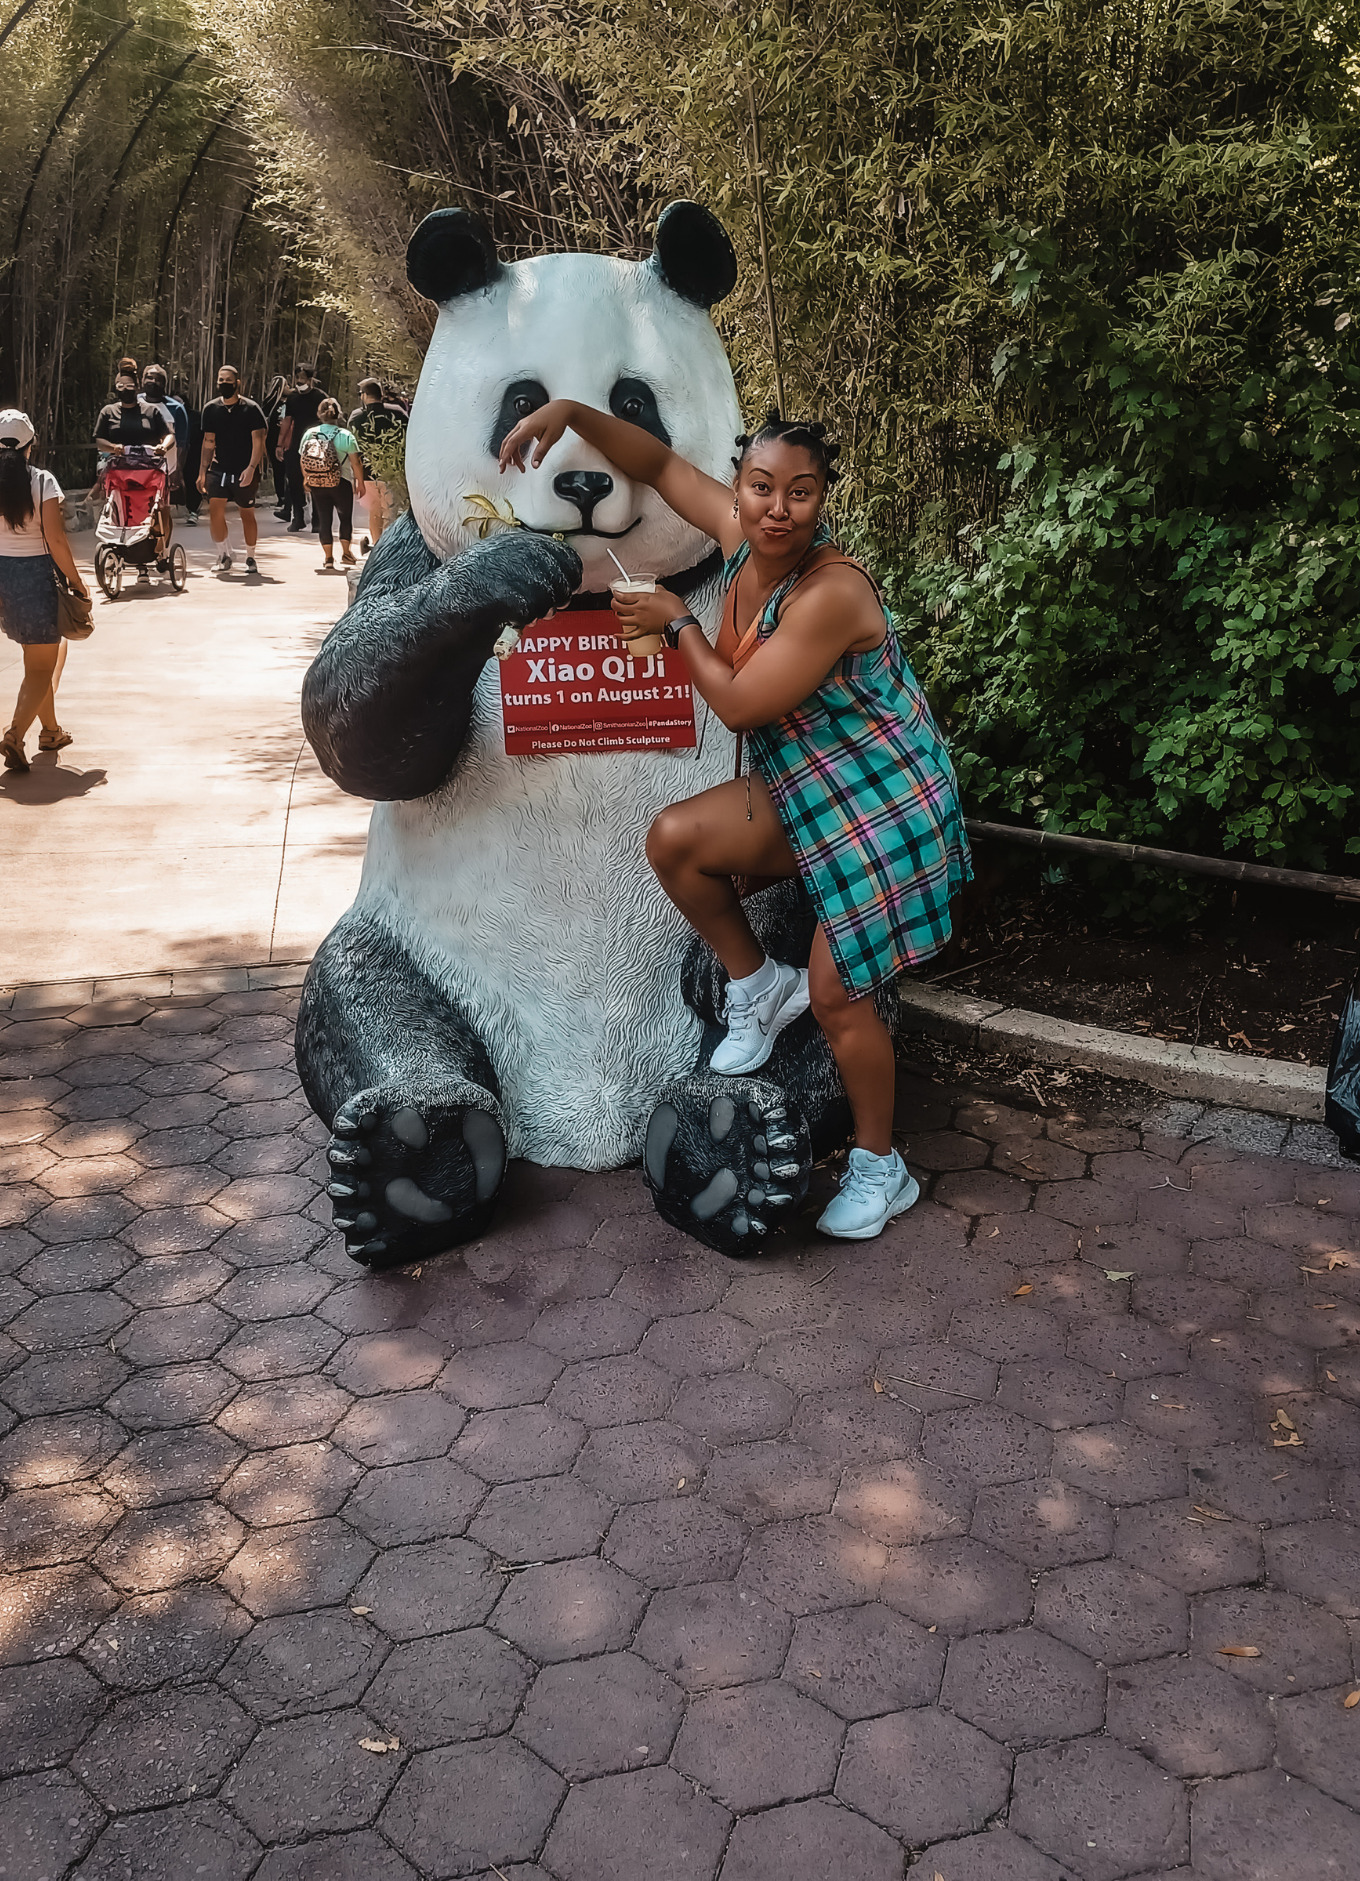 Blogger Rogan Smith poses with a panda statue in front of the DC Zoo